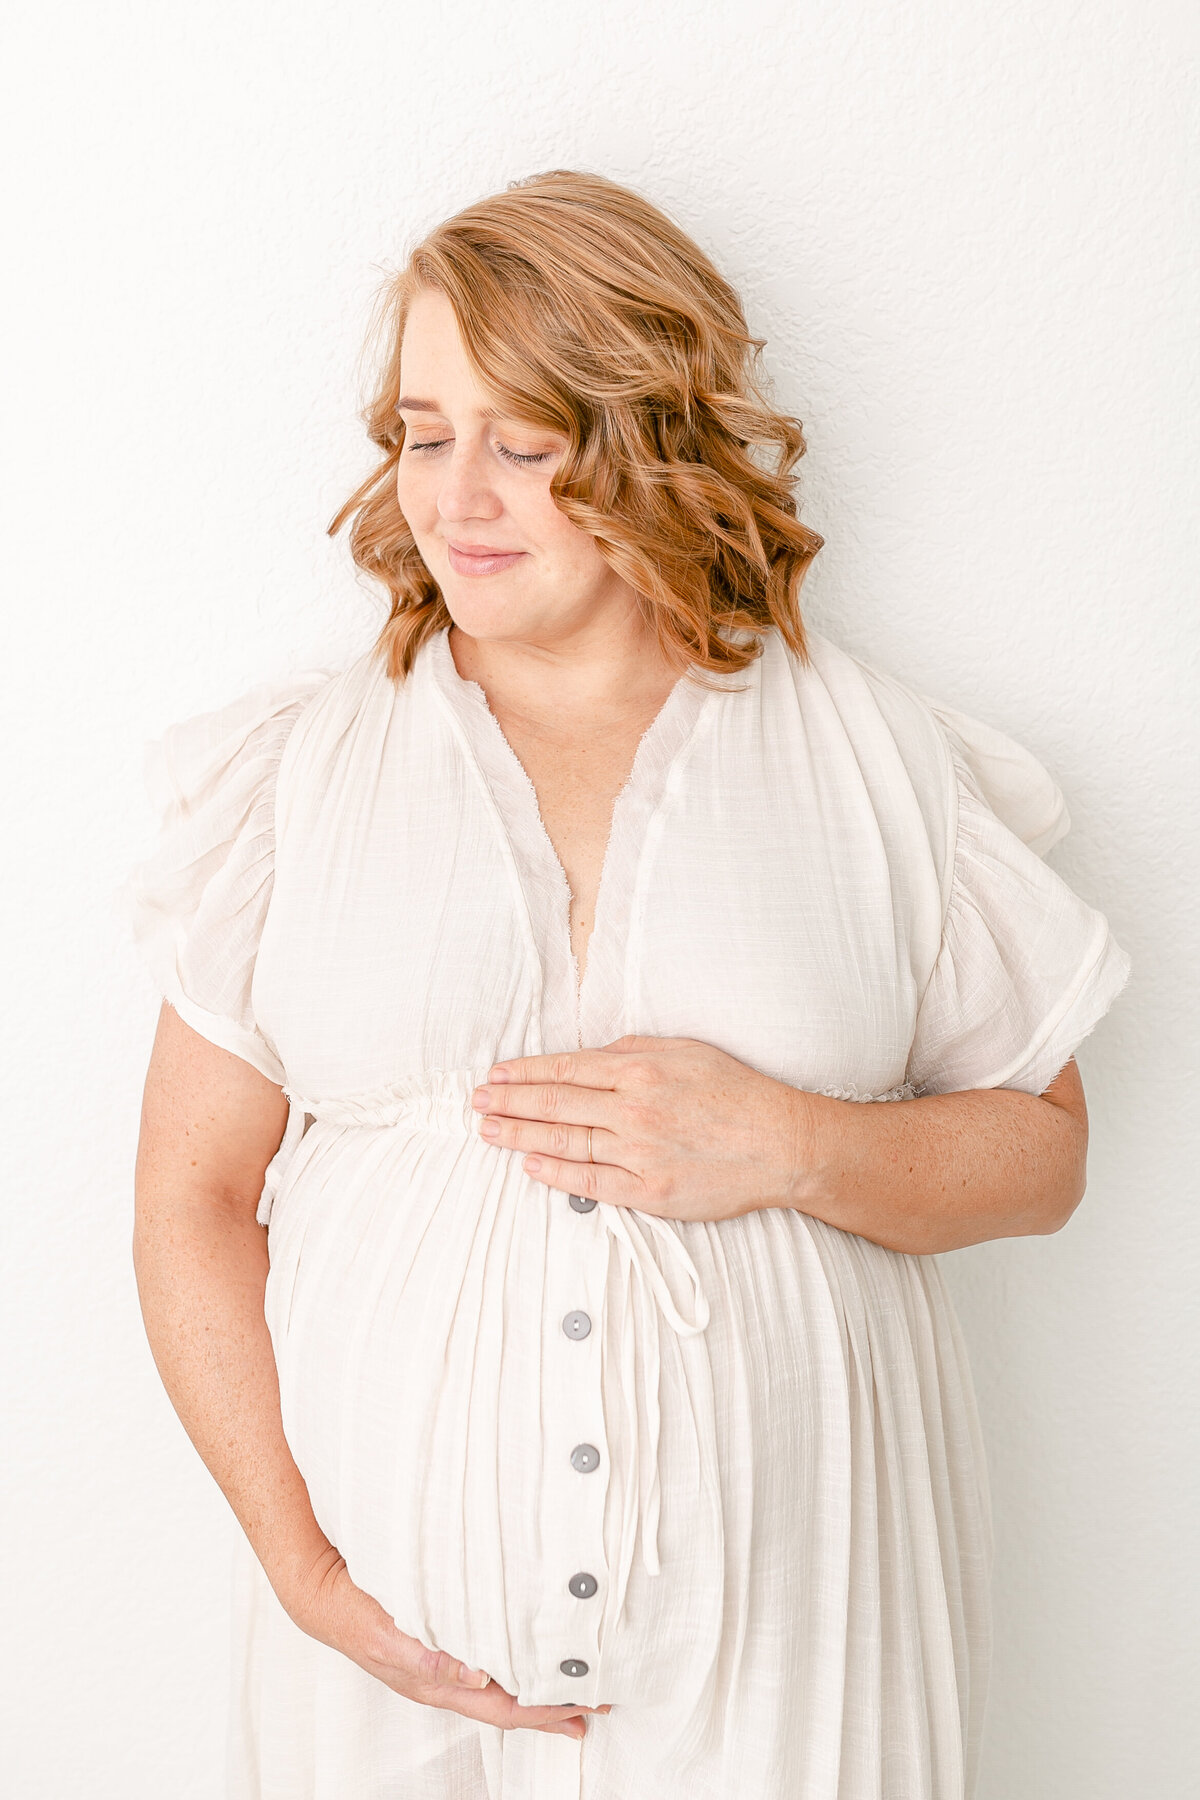 Pregnant Woman dressed in white holding belly and looking down at belly during Studio maternity session in Portland Oregon.